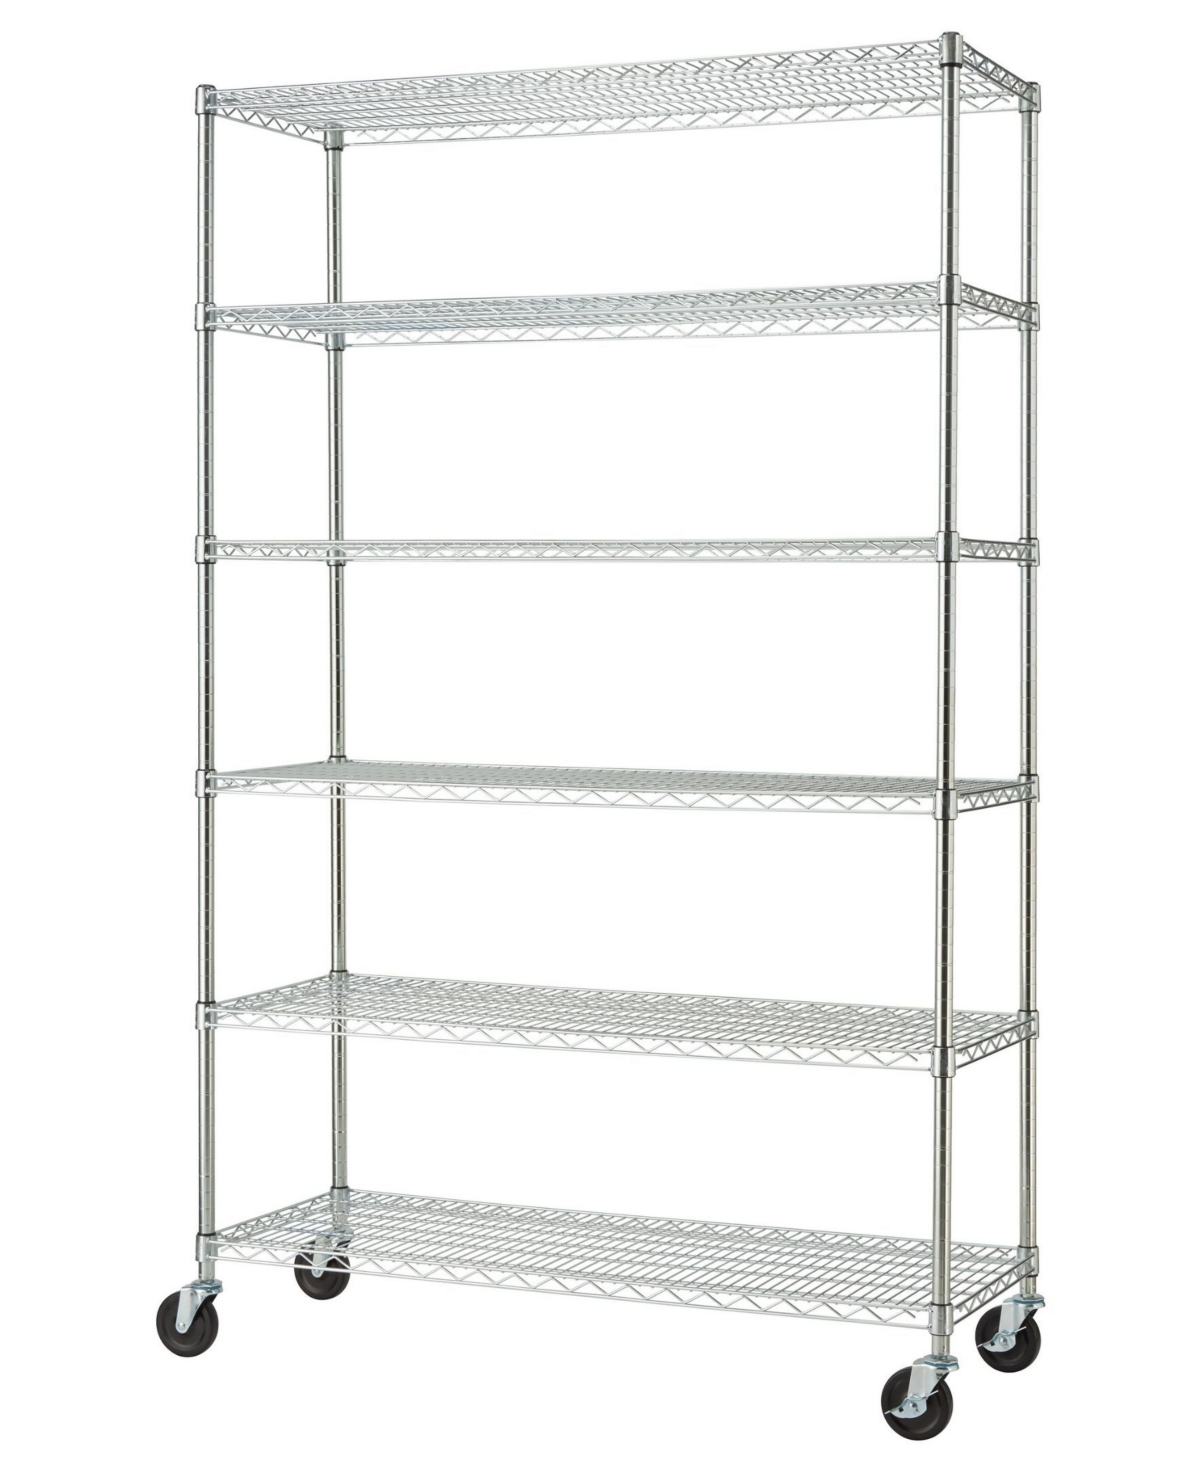 Basics 6-Tier Wire Shelving Rack Includes Wheels - Chrome